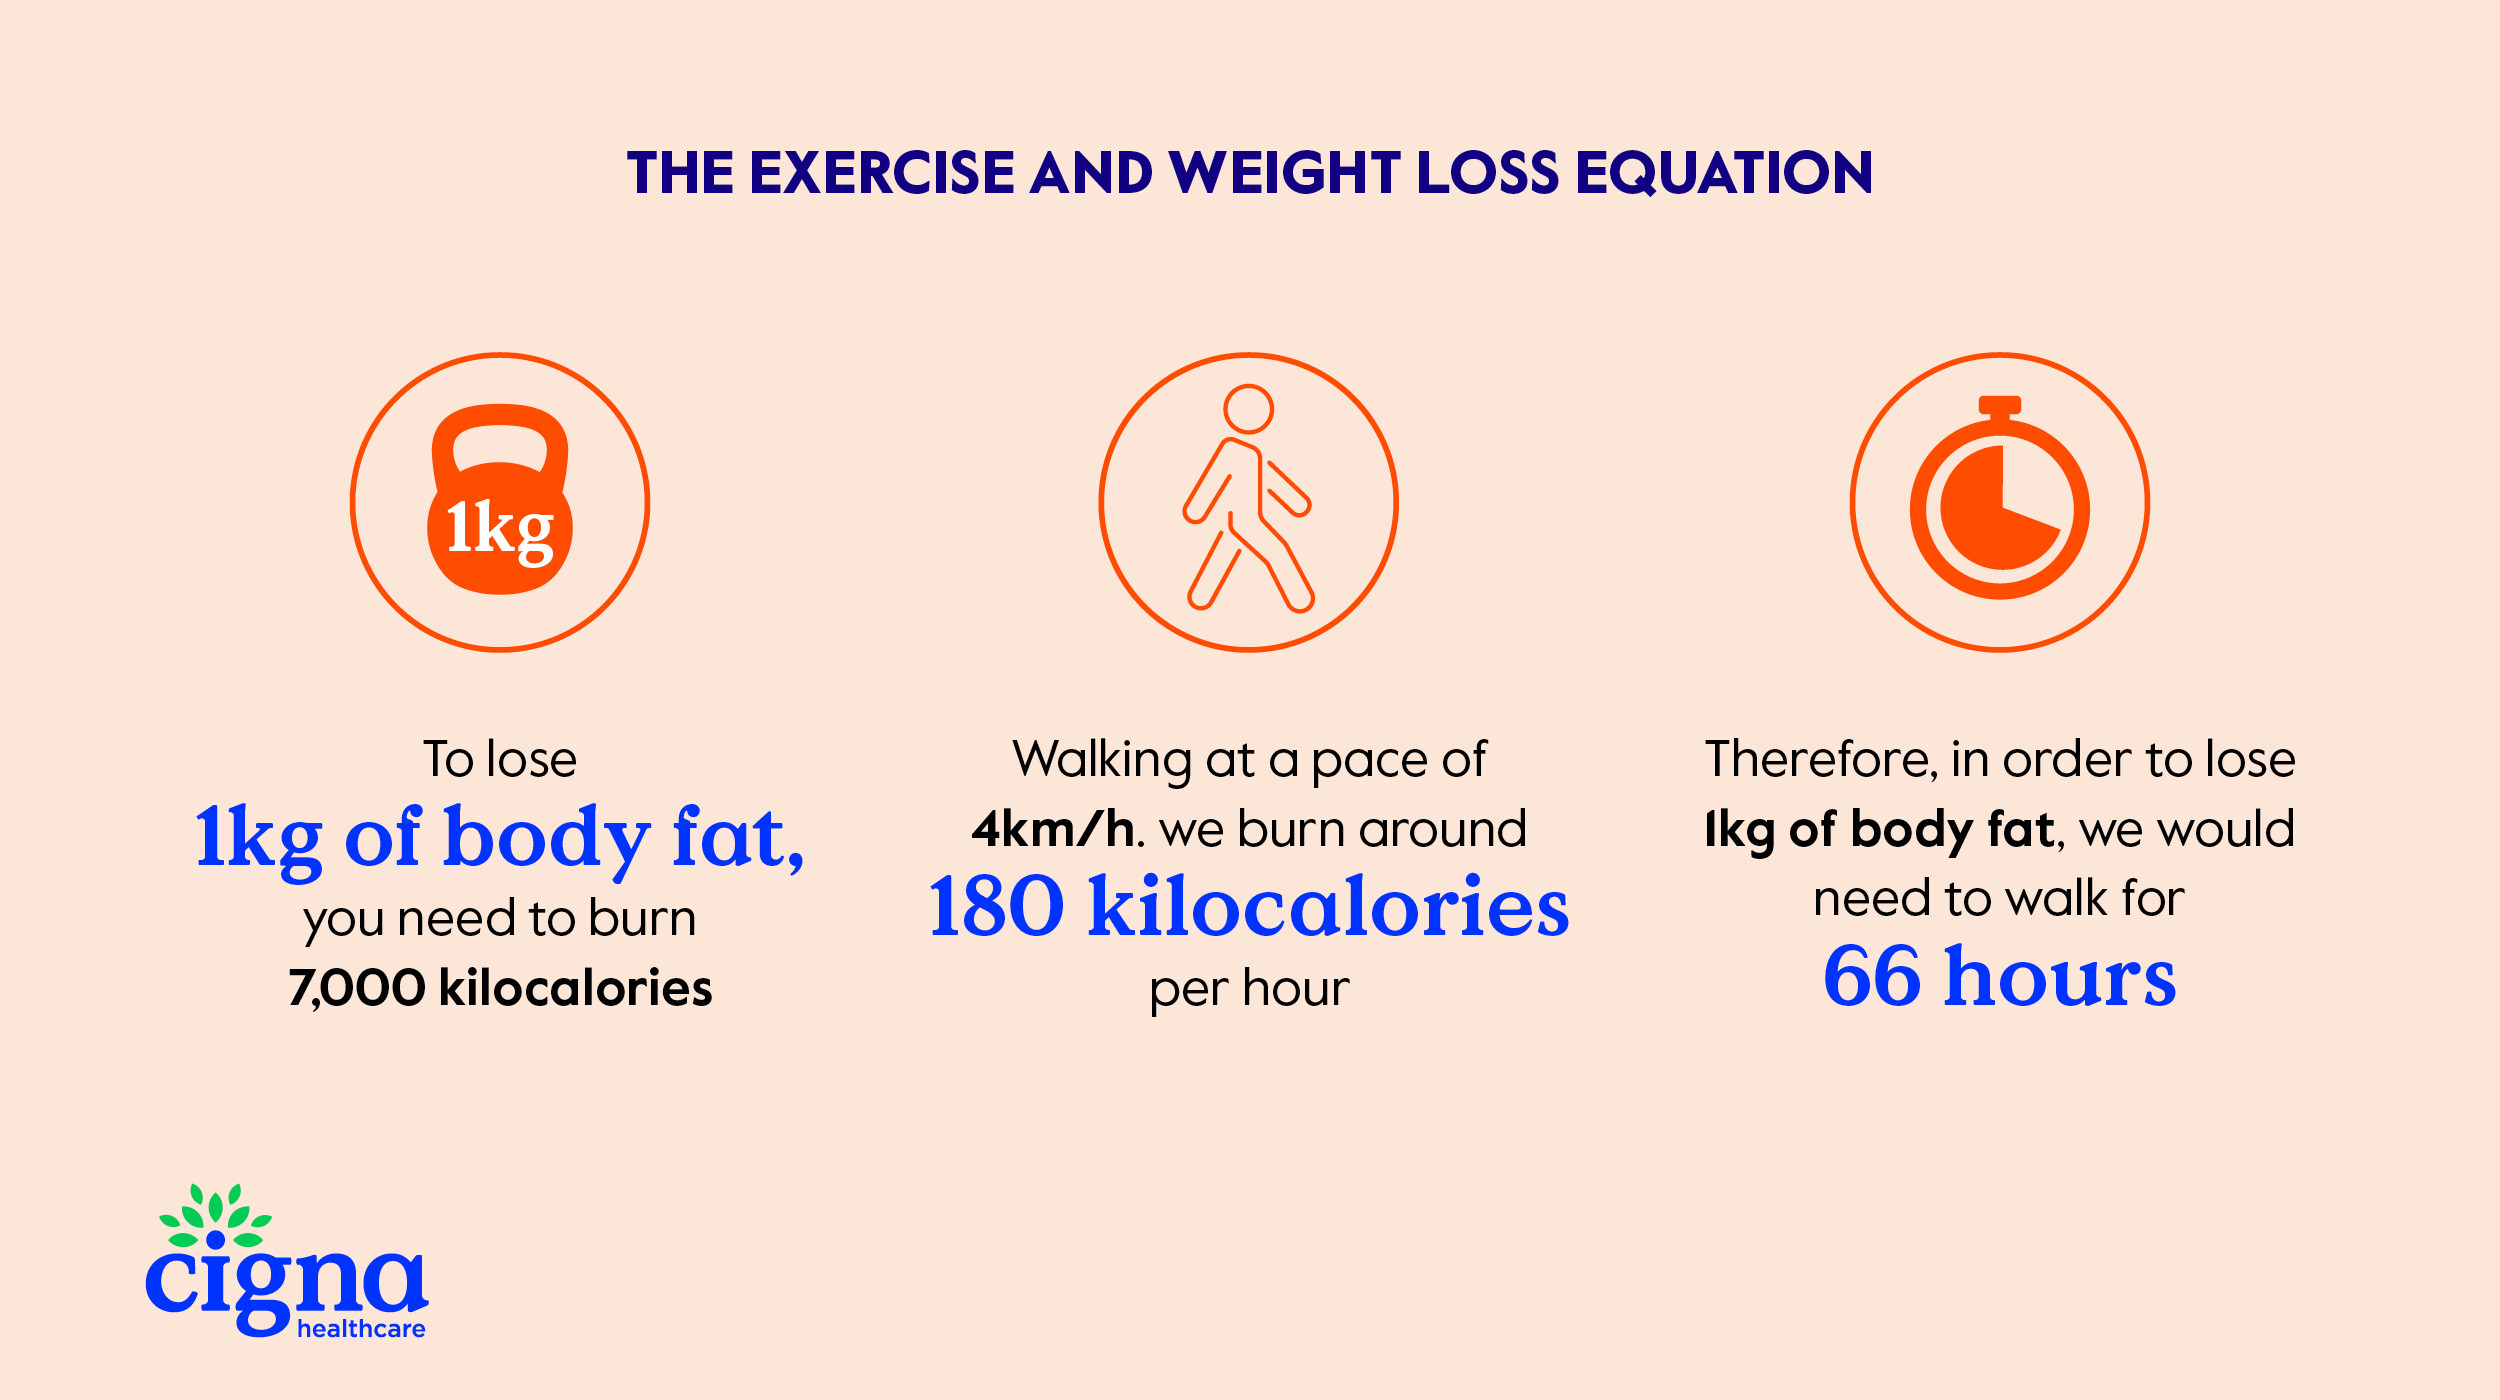 Exercise and weight loss equation